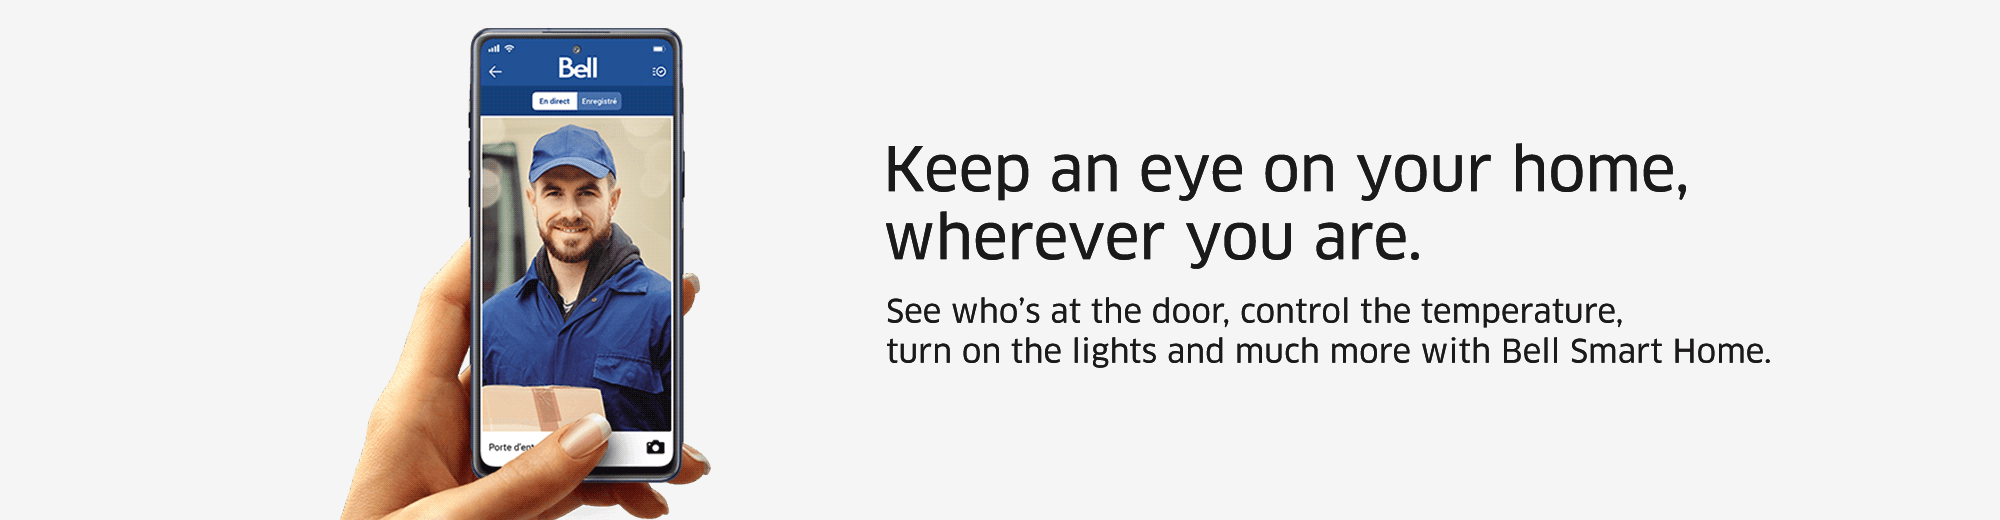 Keep an eye on your home, wherever you are. See who’s at the door, control the temperature, turn on the lights and much more with Bell Smart Home.